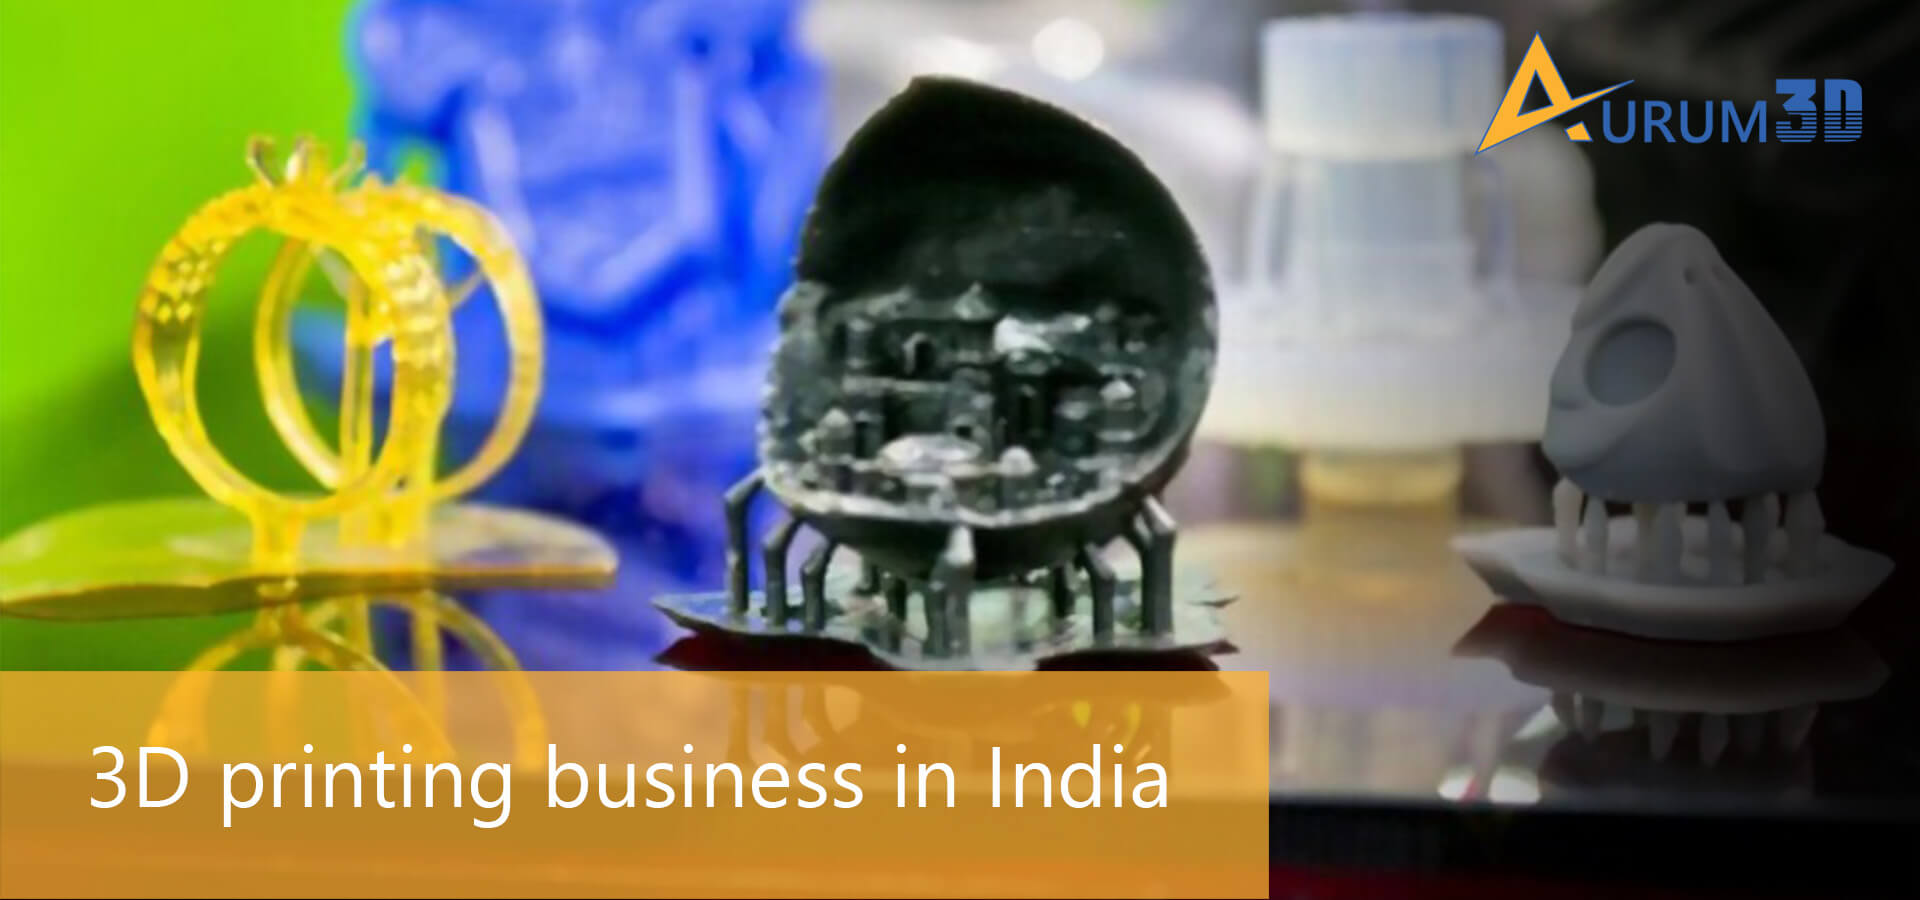 3D printing business in India